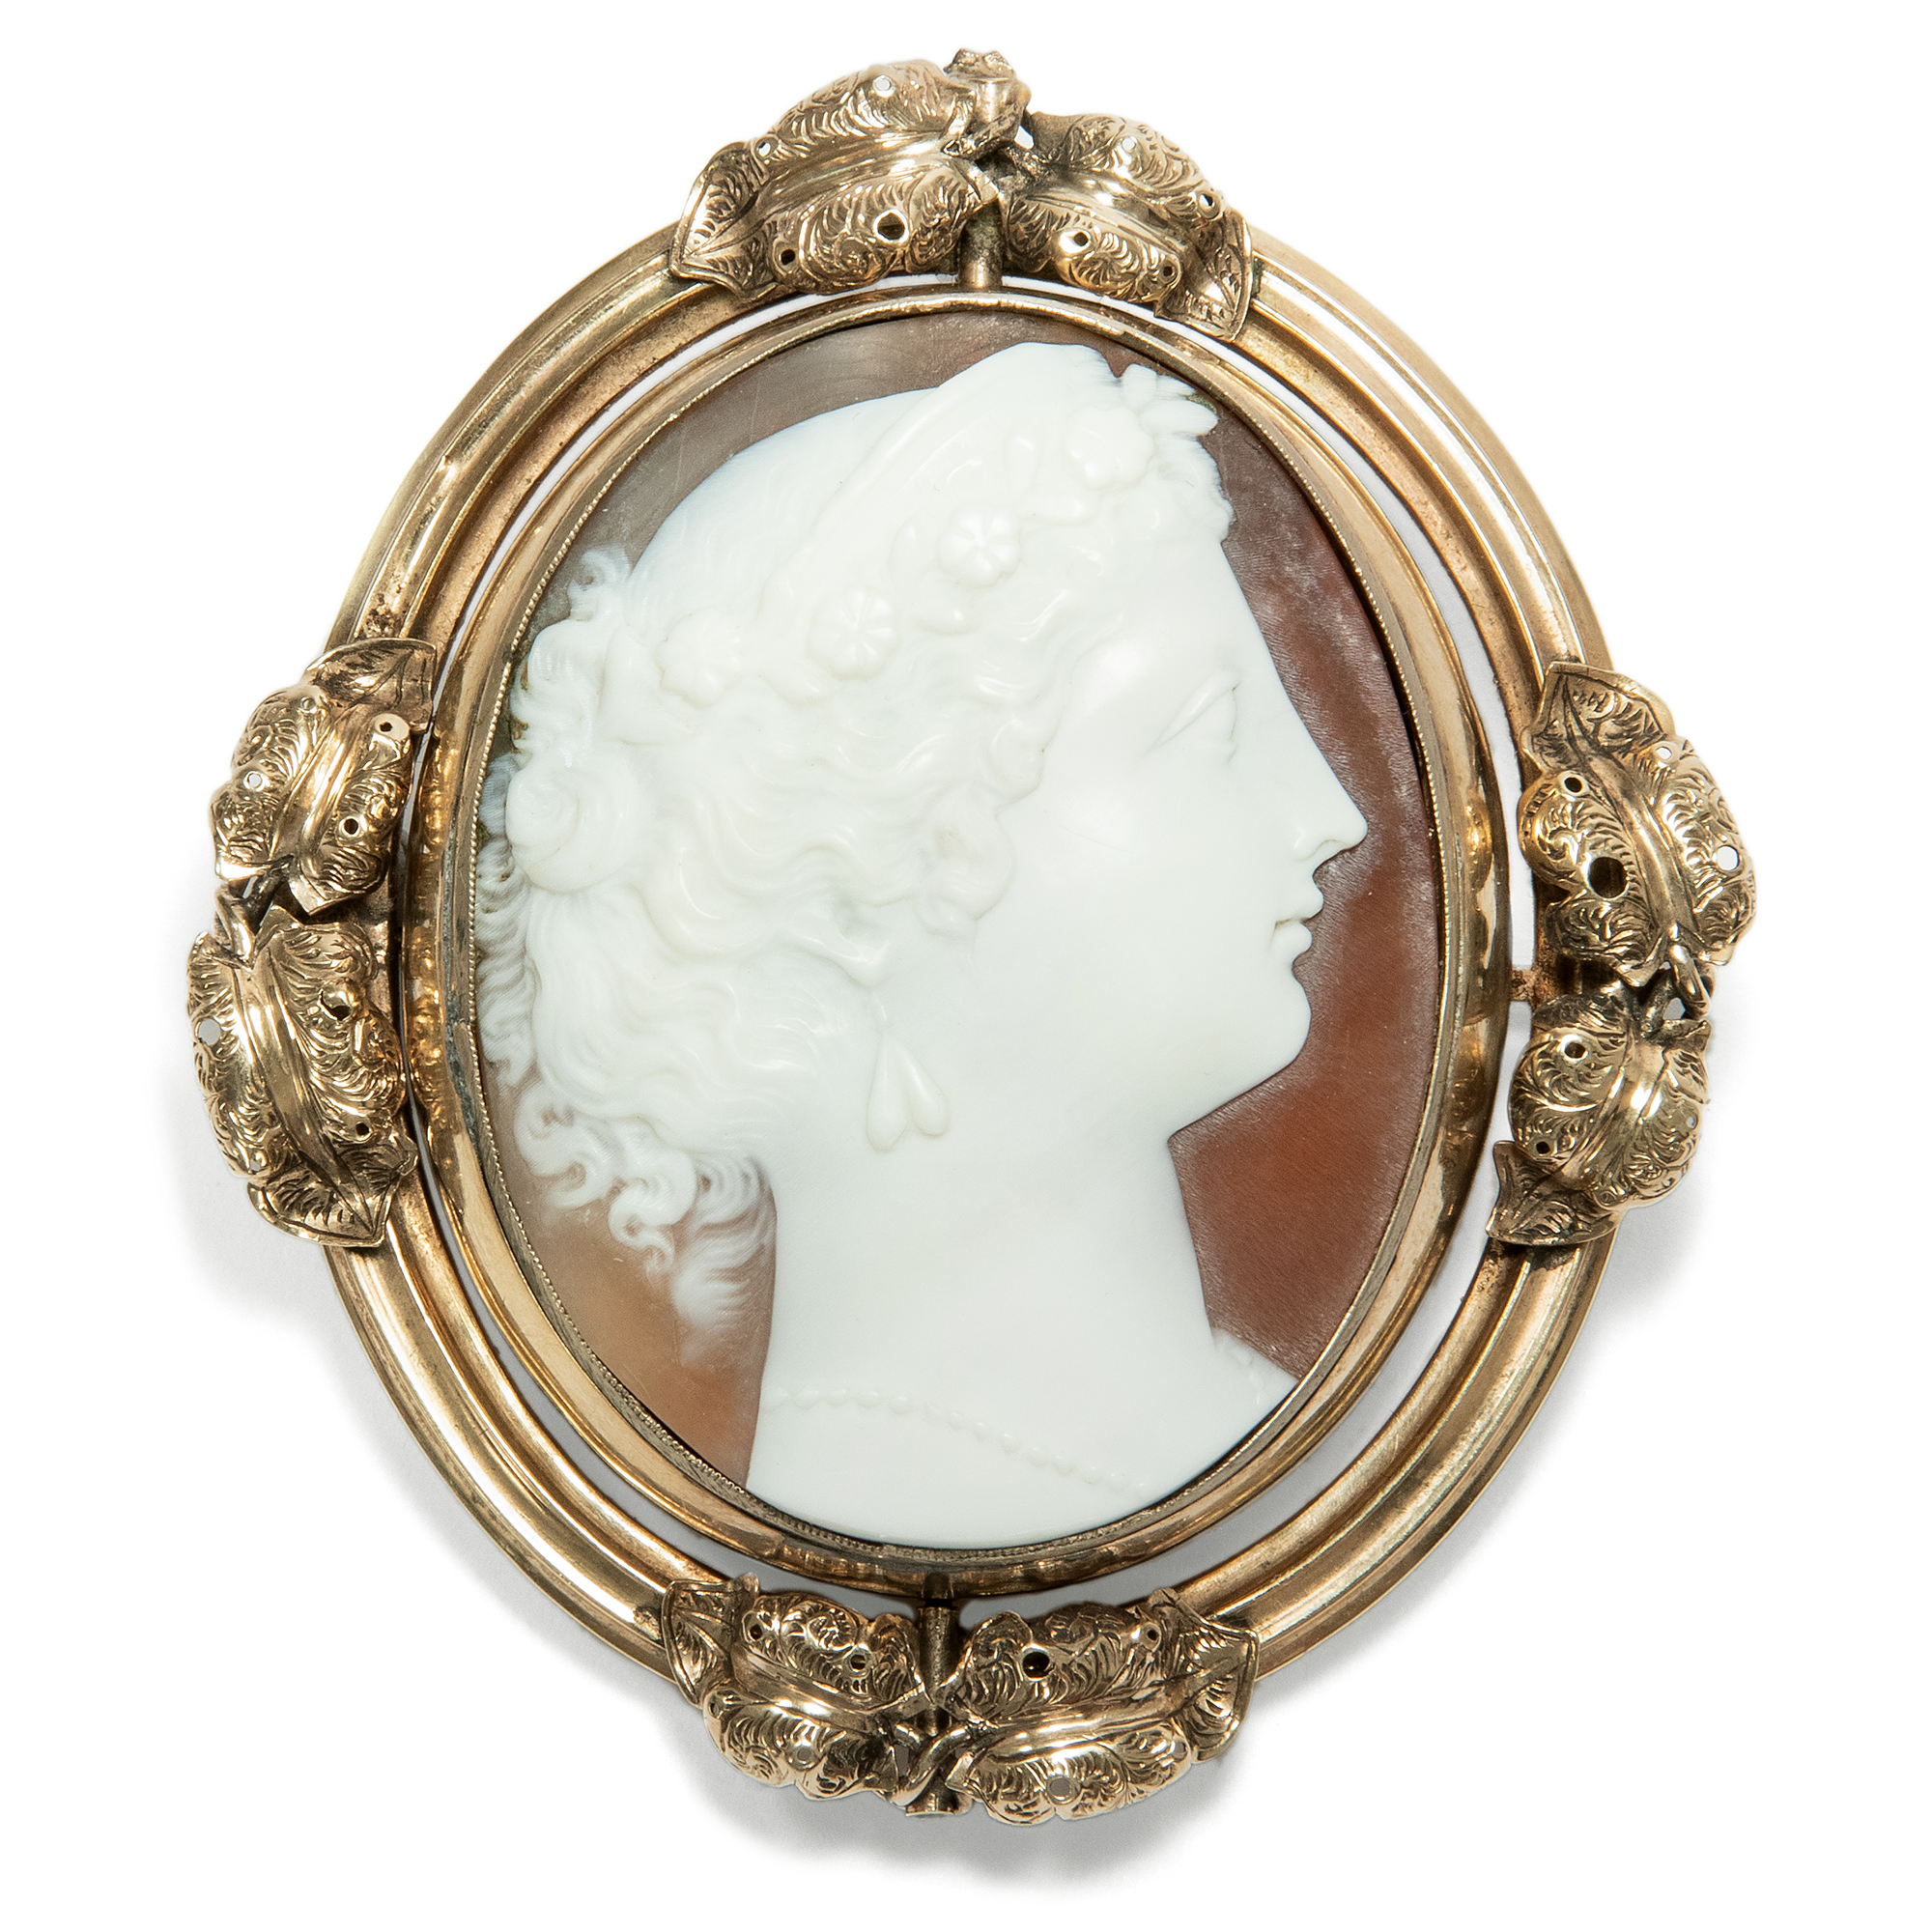 Victorian shell cameo of Juno in gold setting, c. 1855